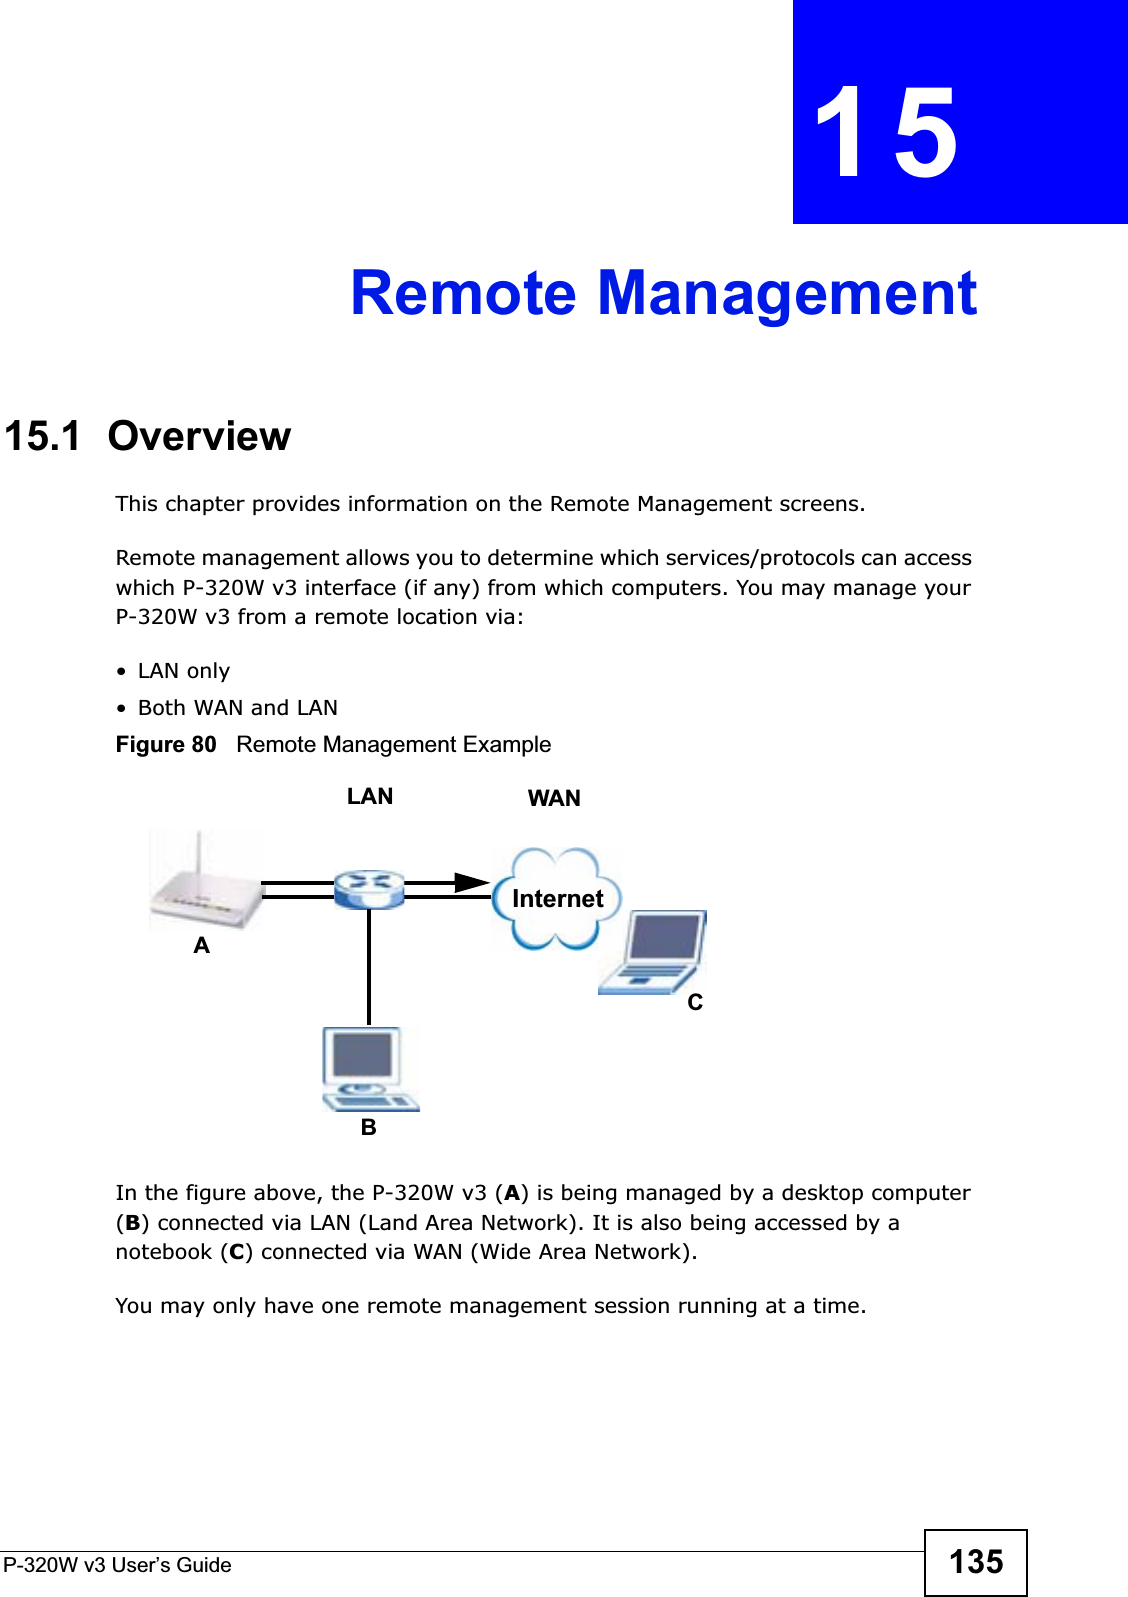 P-320W v3 User’s Guide 135CHAPTER 15Remote Management15.1  OverviewThis chapter provides information on the Remote Management screens. Remote management allows you to determine which services/protocols can access which P-320W v3 interface (if any) from which computers. You may manage your P-320W v3 from a remote location via:•LAN only•Both WAN and LANFigure 80   Remote Management ExampleIn the figure above, the P-320W v3 (A) is being managed by a desktop computer (B) connected via LAN (Land Area Network). It is also being accessed by a notebook (C) connected via WAN (Wide Area Network).You may only have one remote management session running at a time.ABCLAN WANInternet